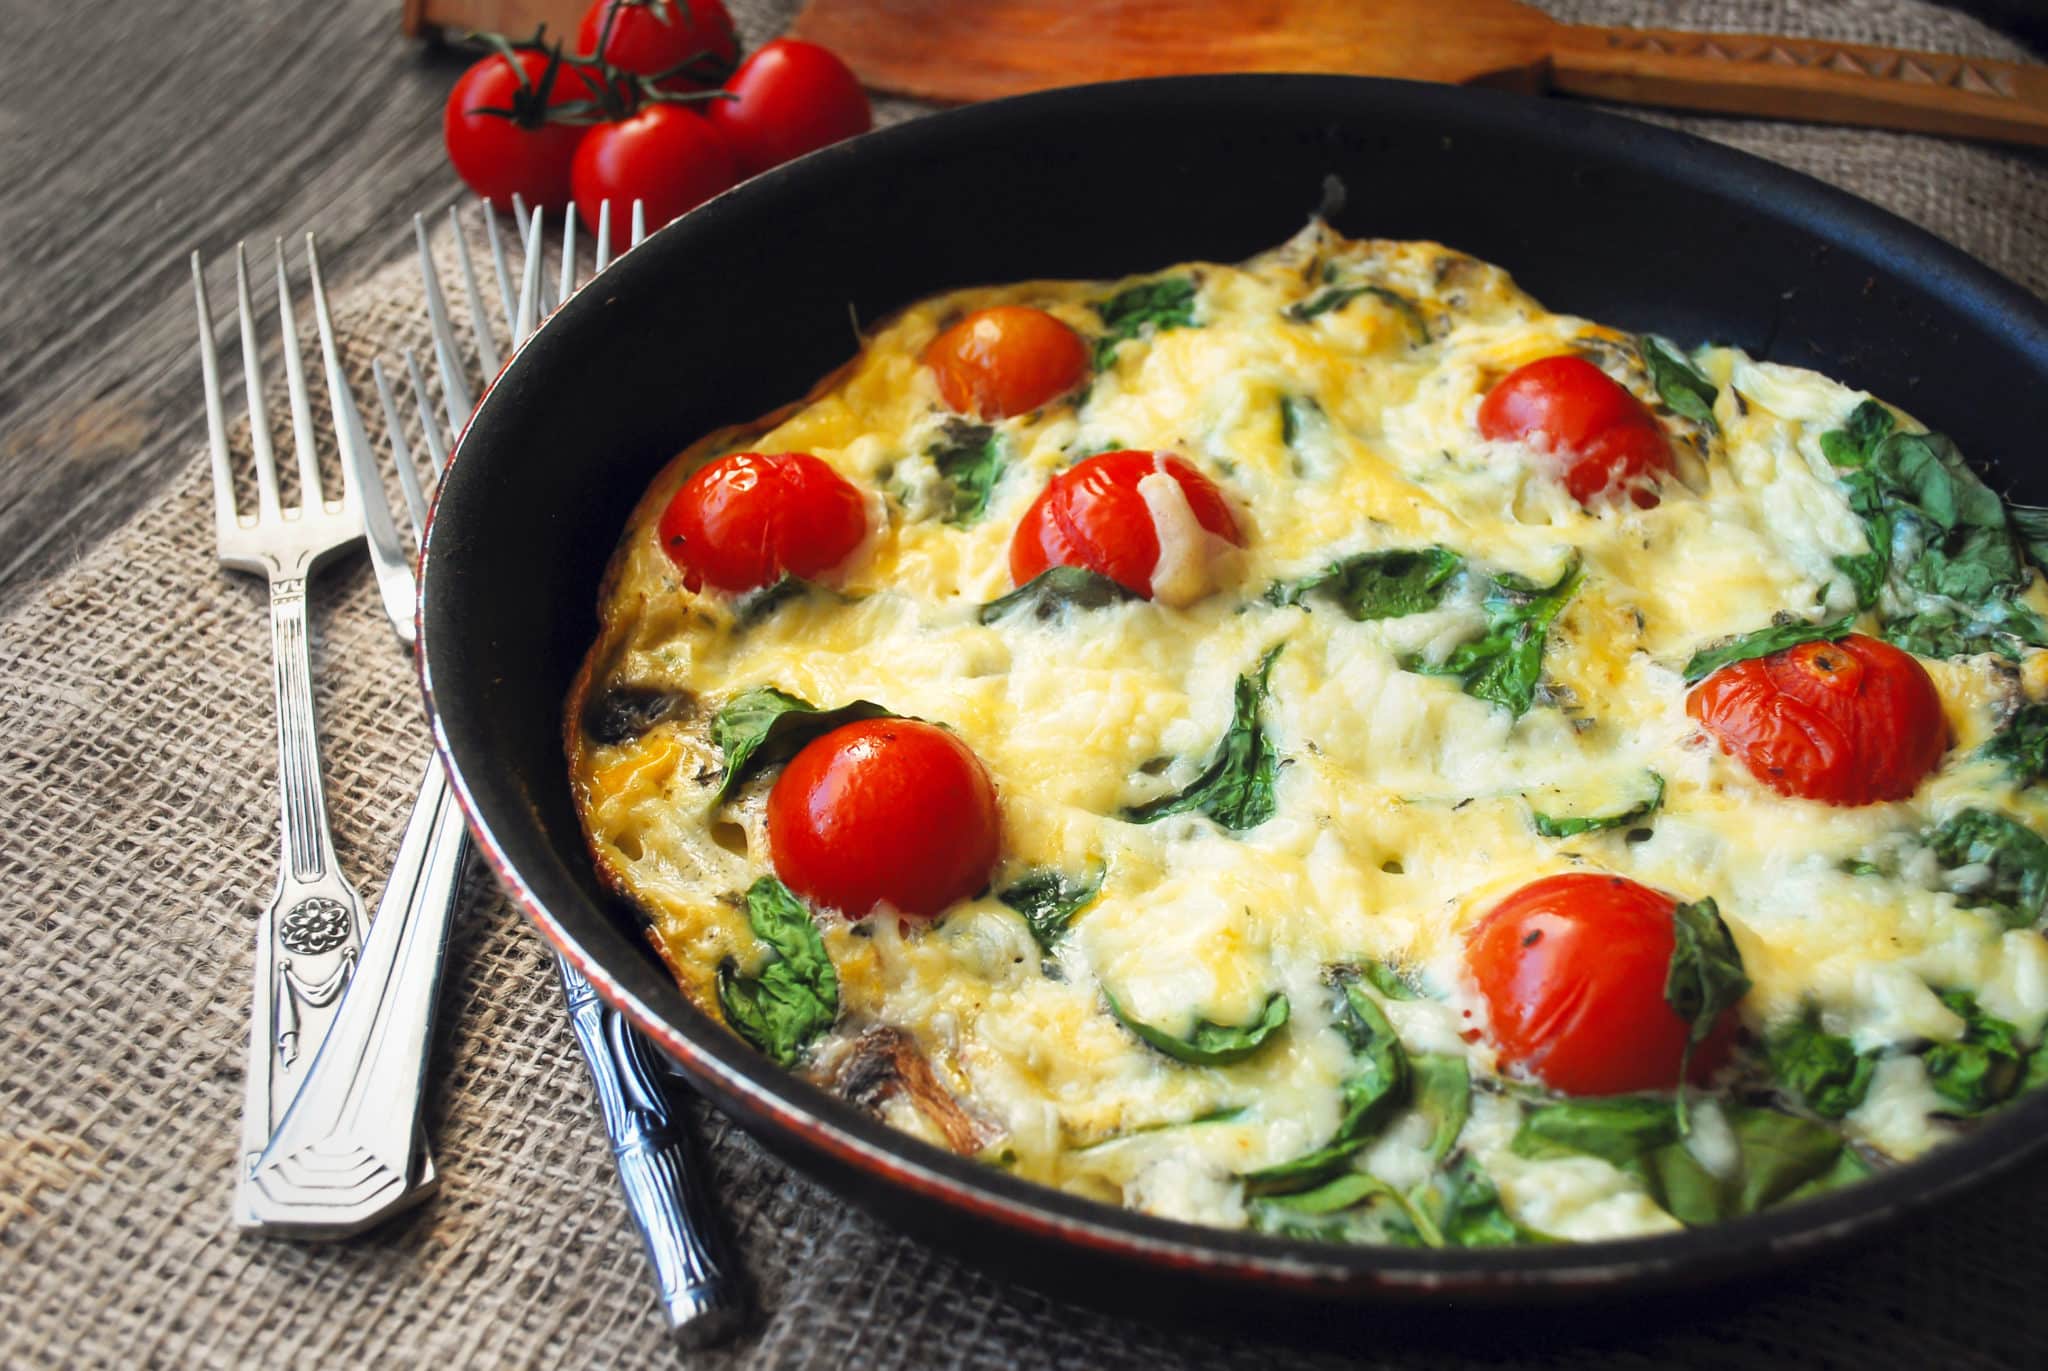 Frittata (italian omelet) with cherry tomatoes and spinach in pan on linen cloth.